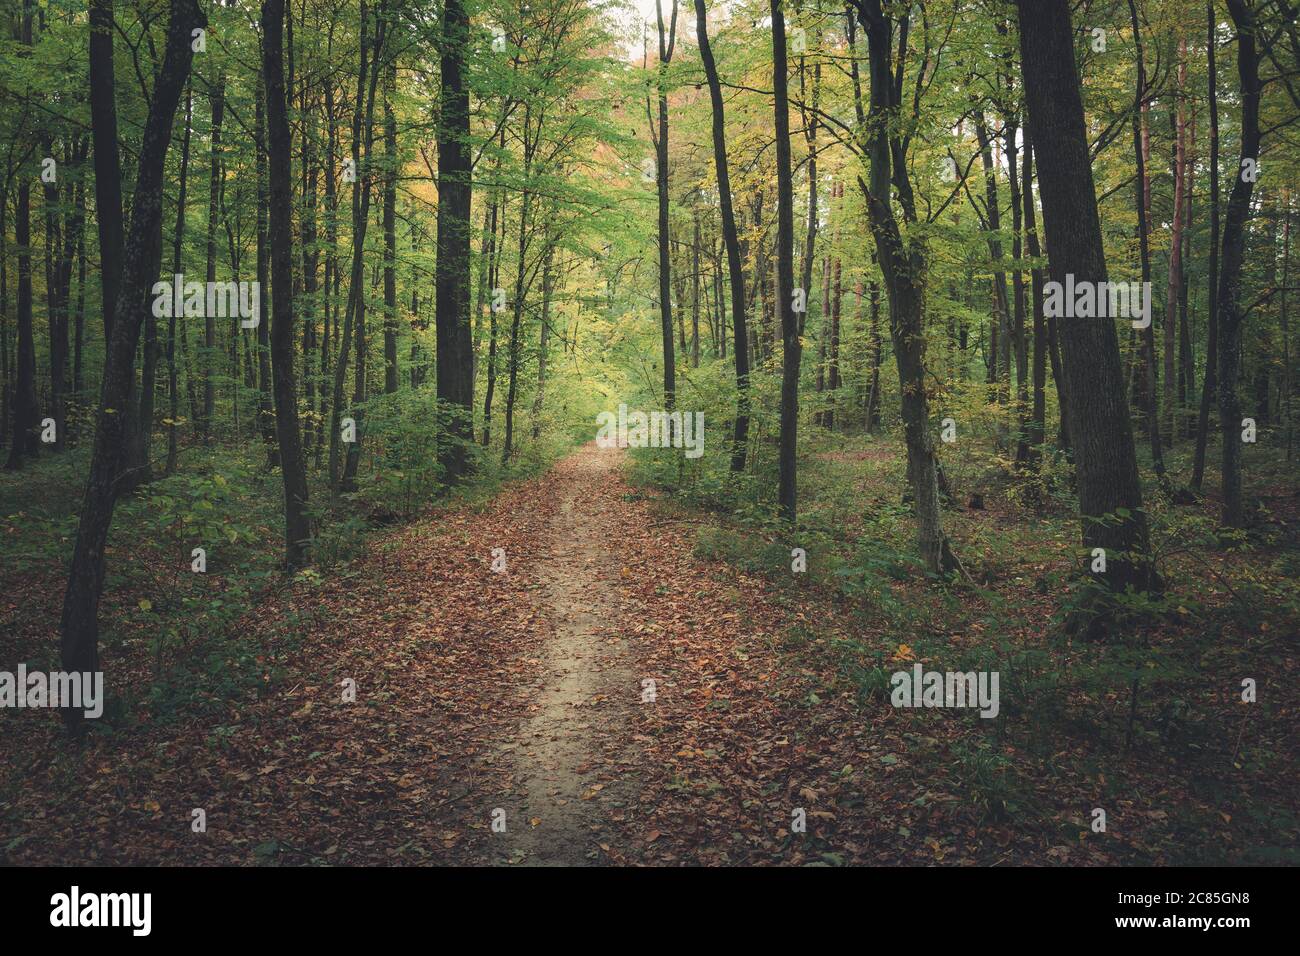 The path through the dark green forest, autumn view Stock Photo